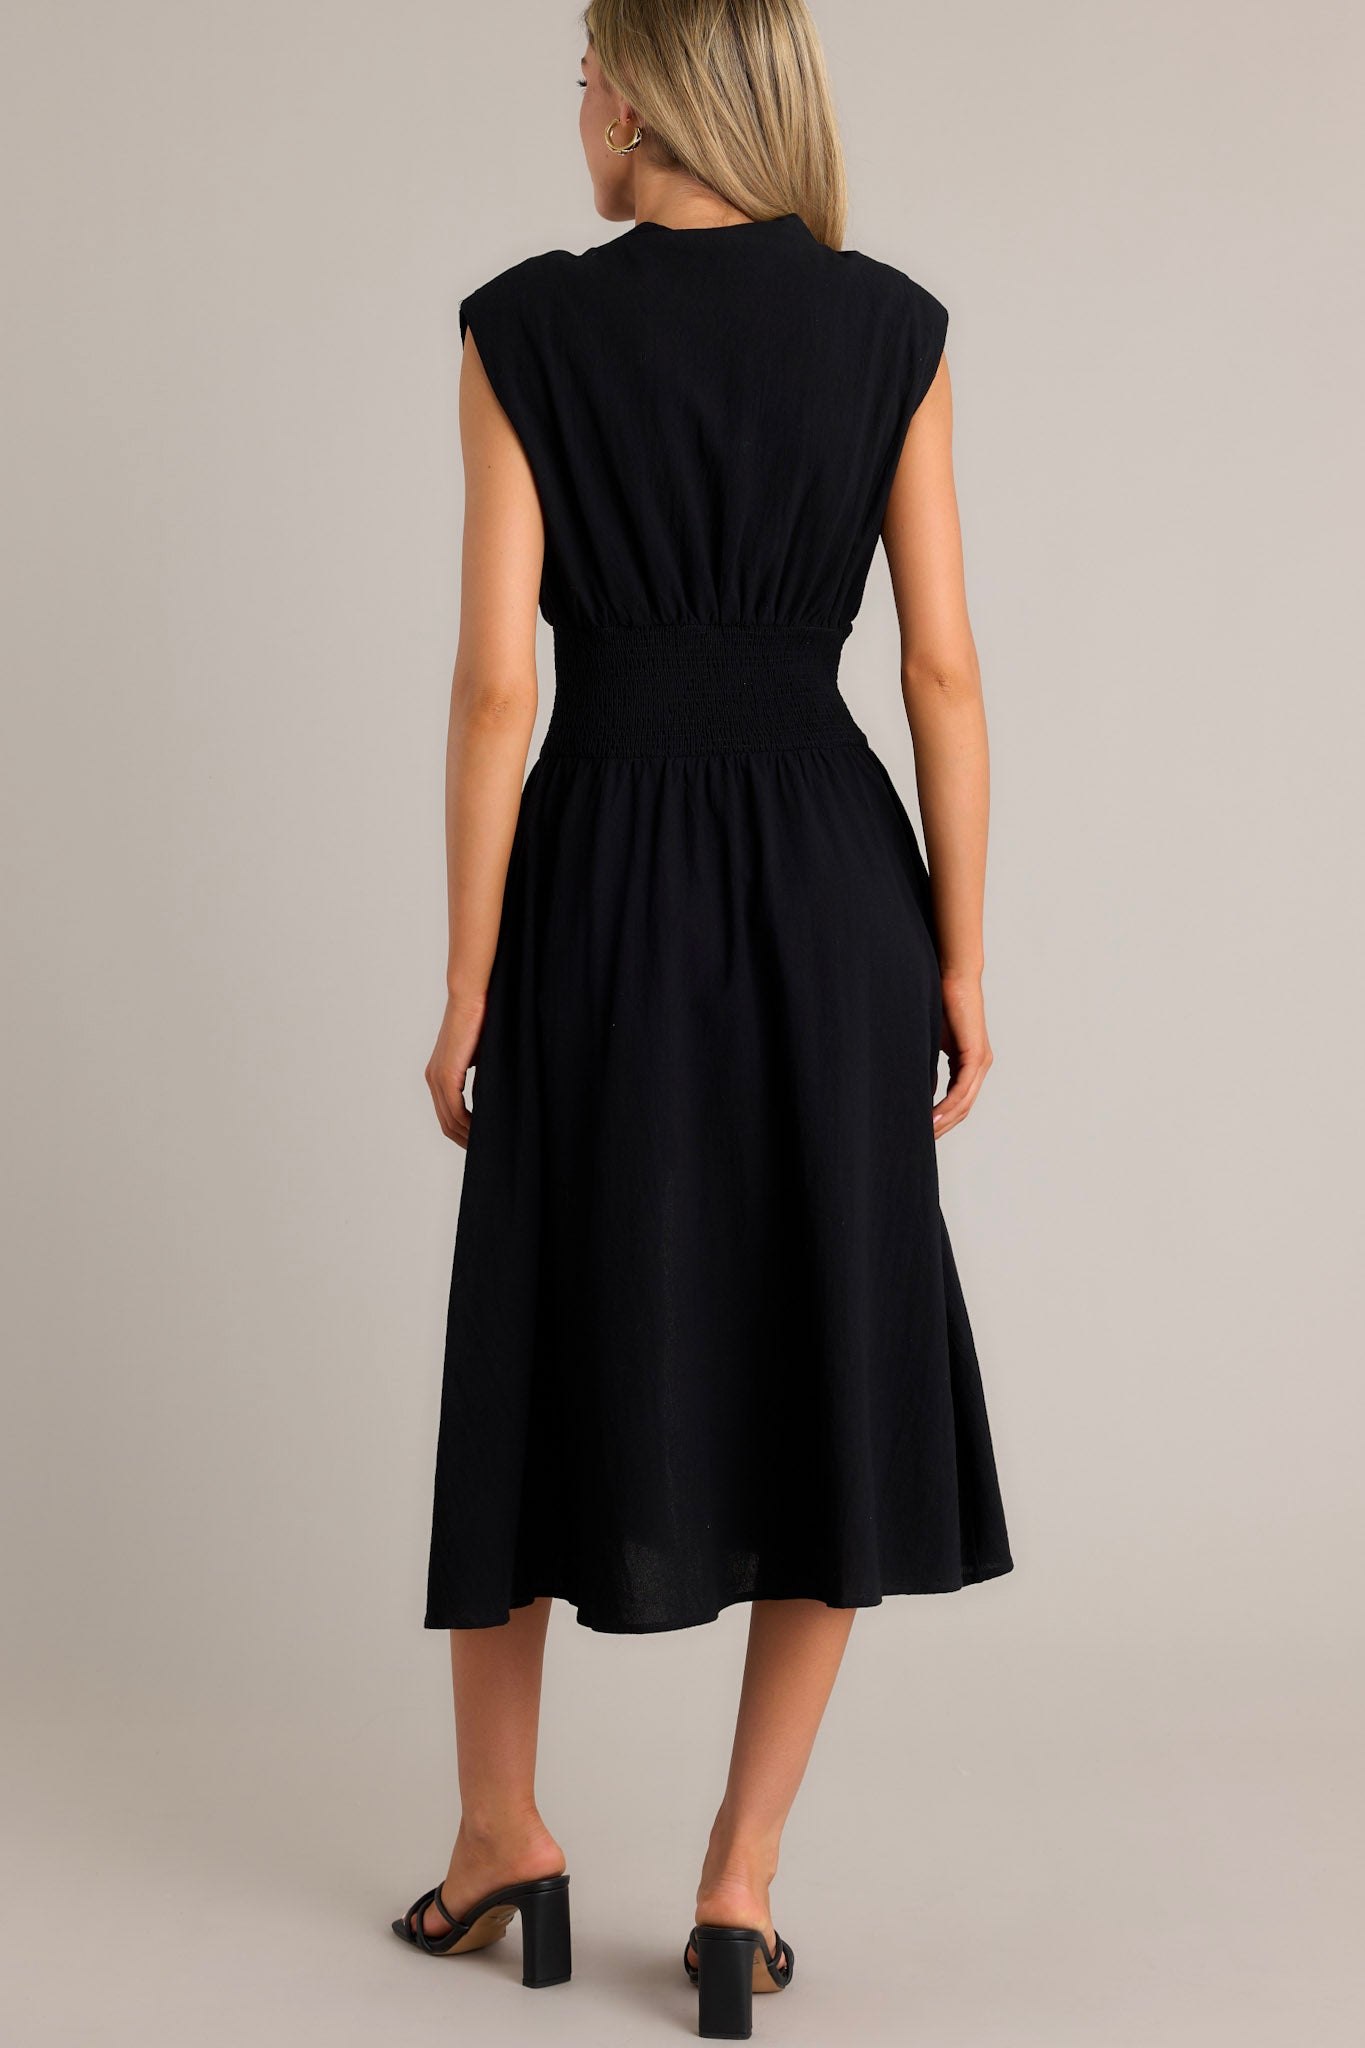 Back view of a black midi dress highlighting the shoulder padding, fully smocked waist, and overall fit.